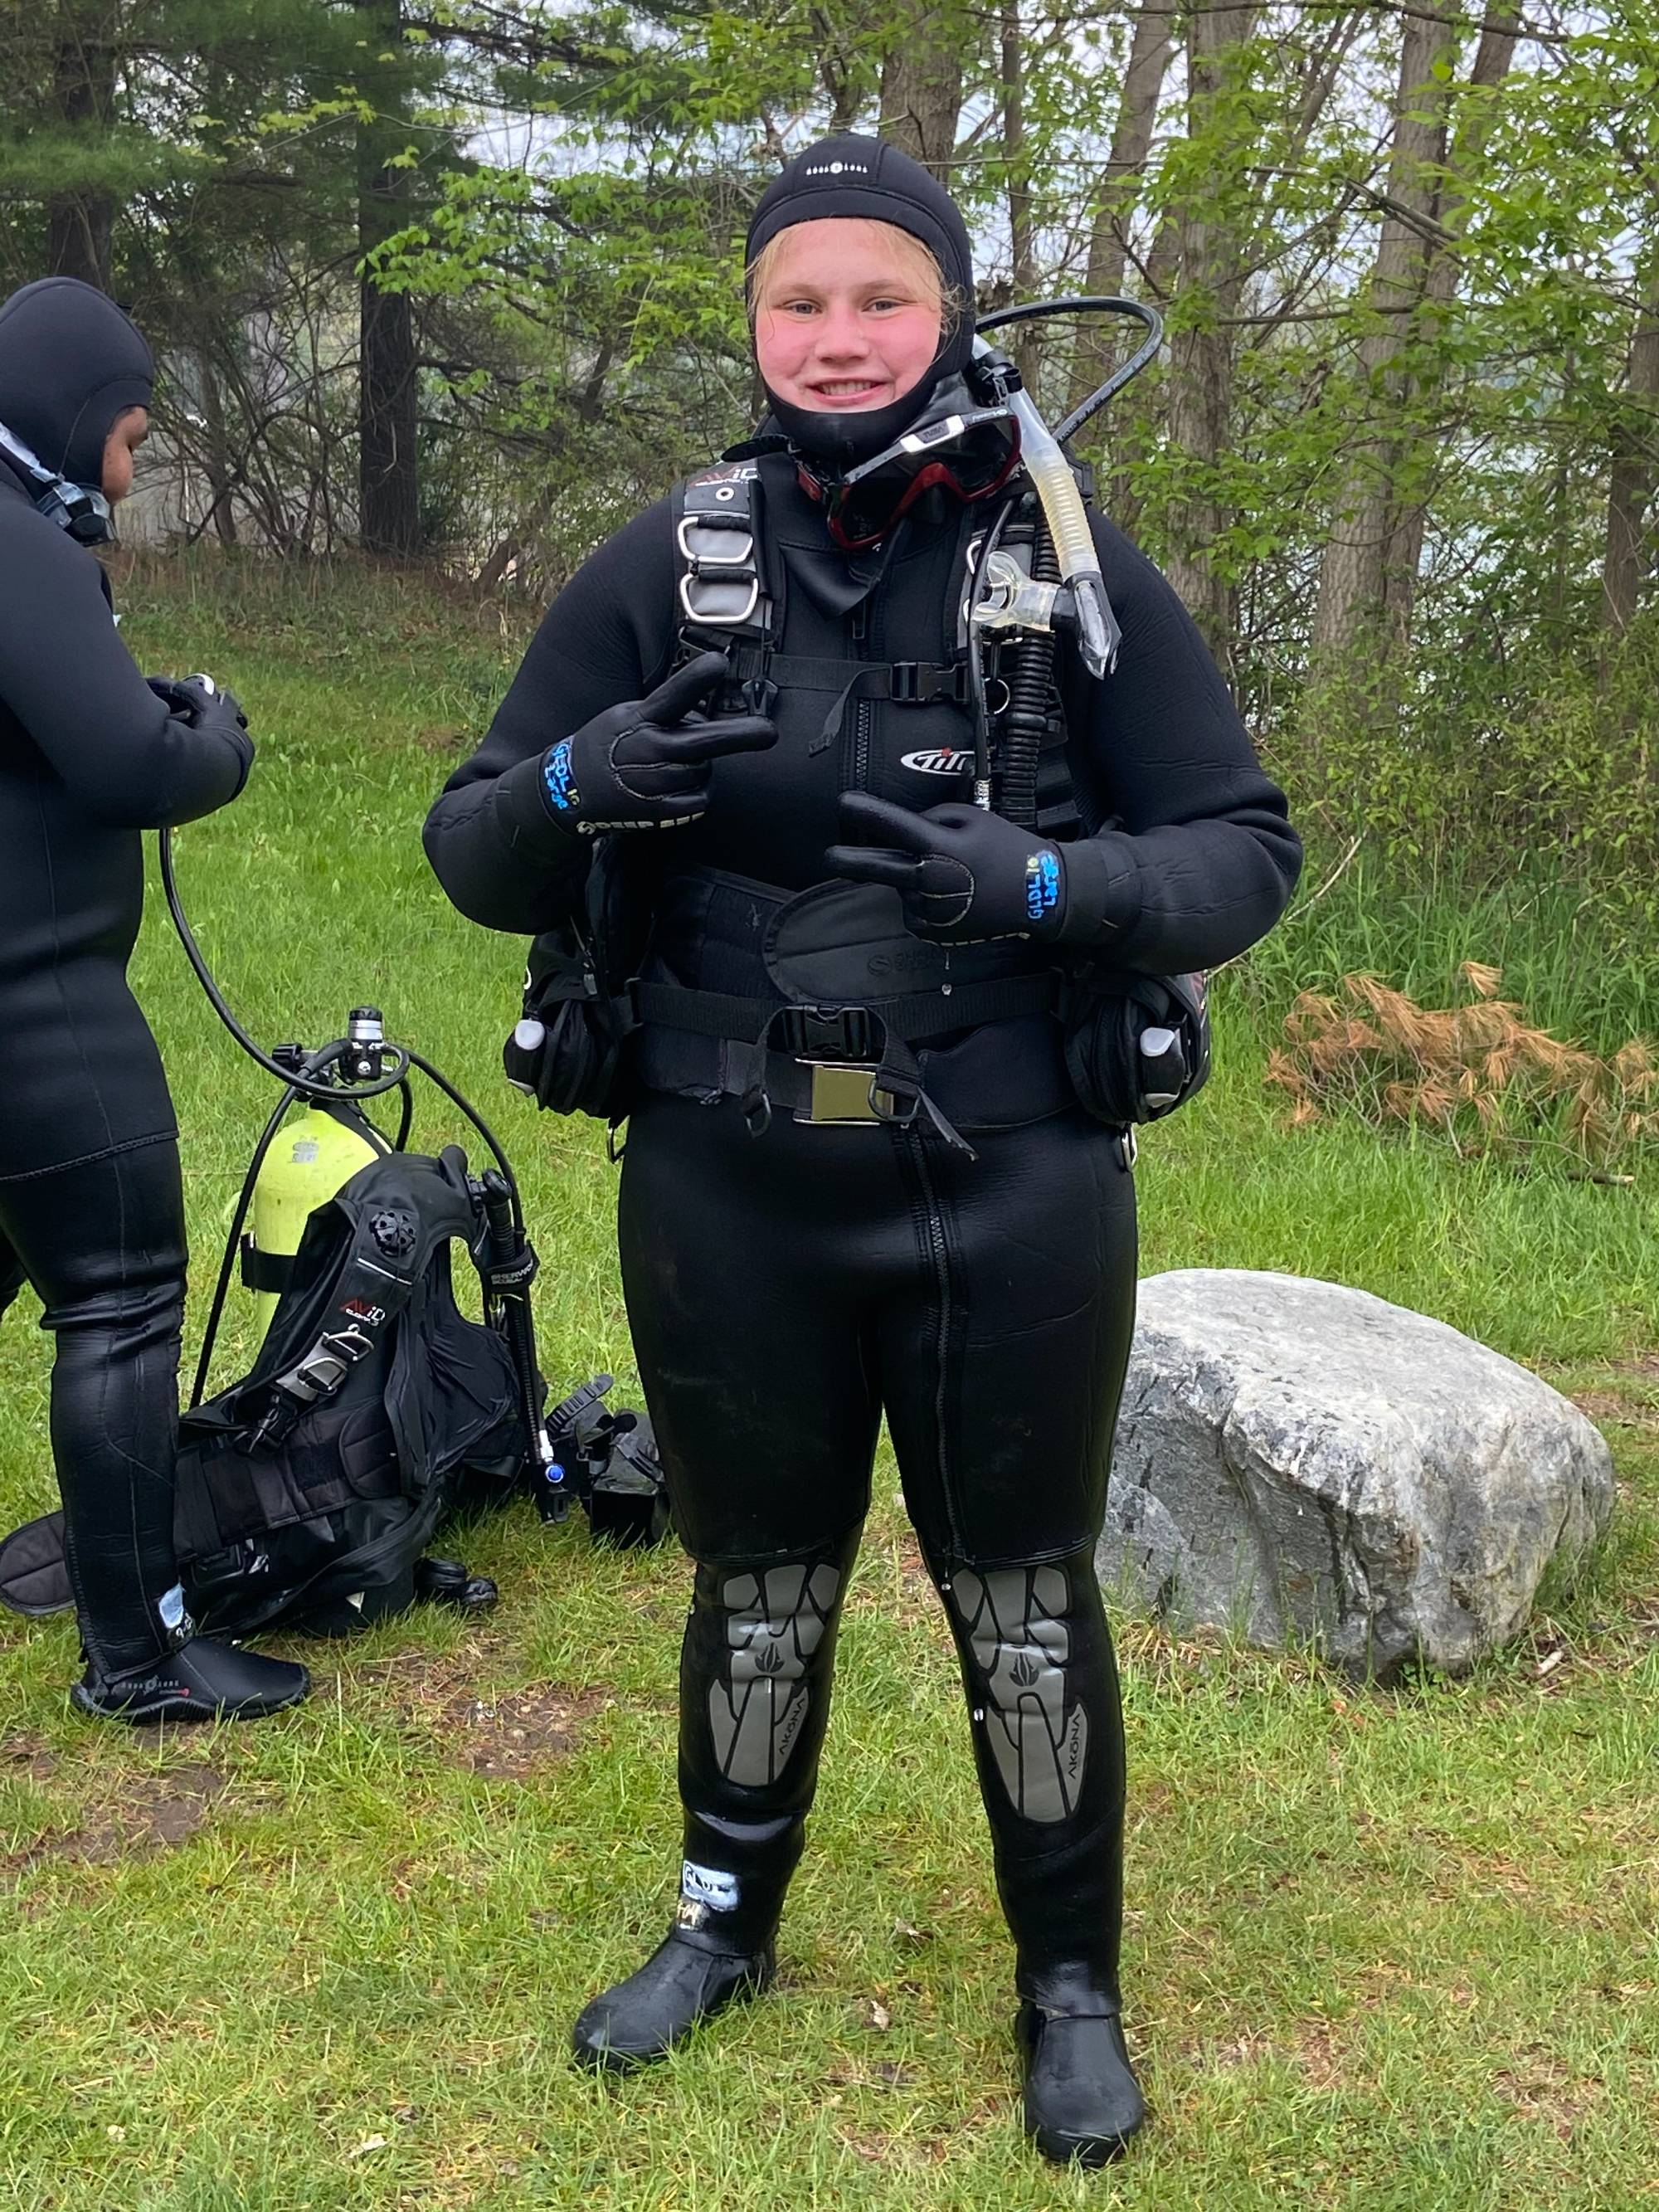 Scuba student throws up a peace sign before diving